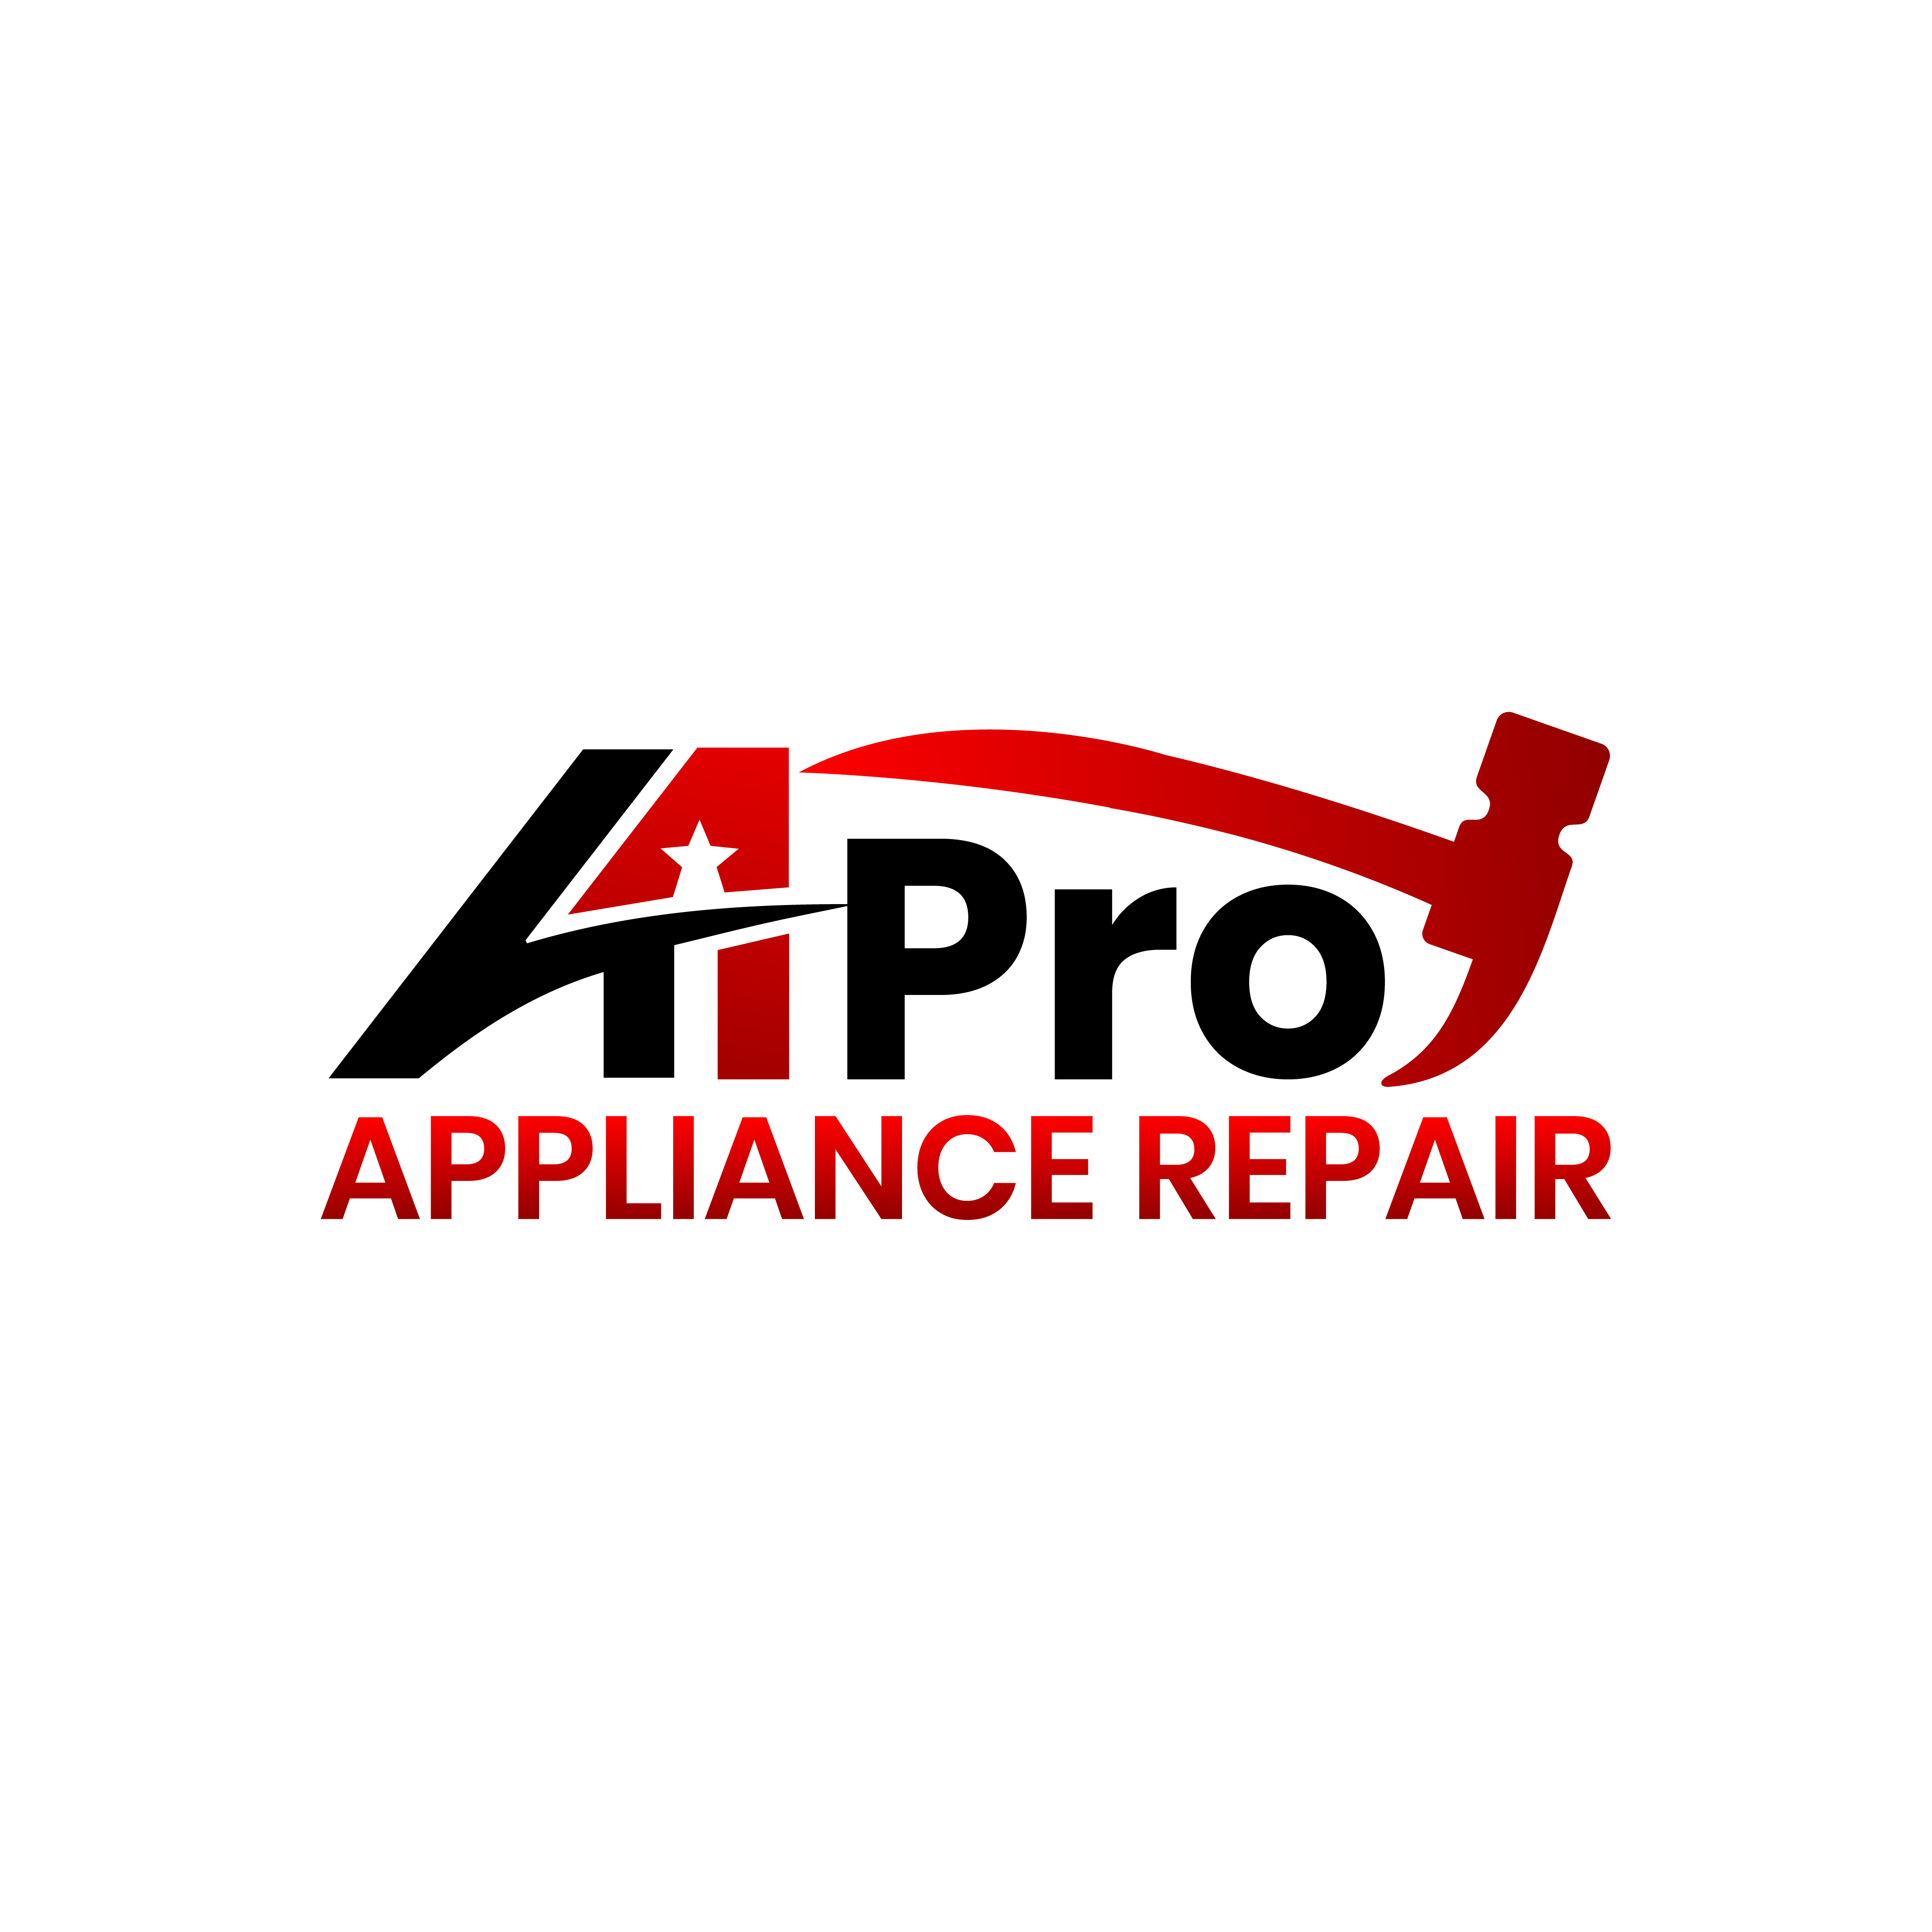 A1 Pro Appliance Repair Announces Why Property Owners Choose Them for Appliance Repair Services